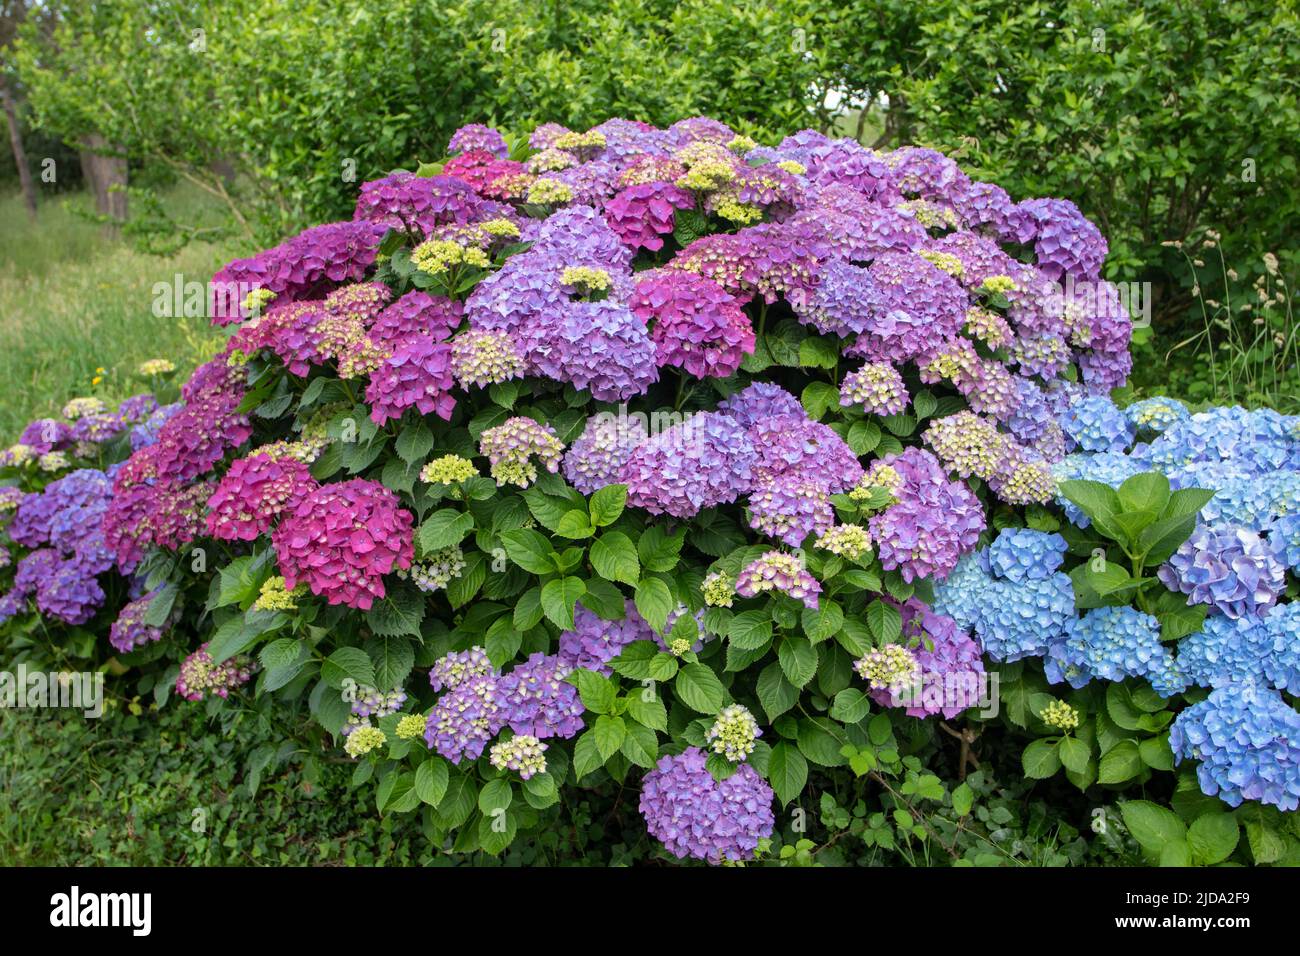 Purple and blue hortensia flowering plants on the lush foliage background. French hydrangea flowering plants in Luarca,Asturias,Spain. Stock Photo